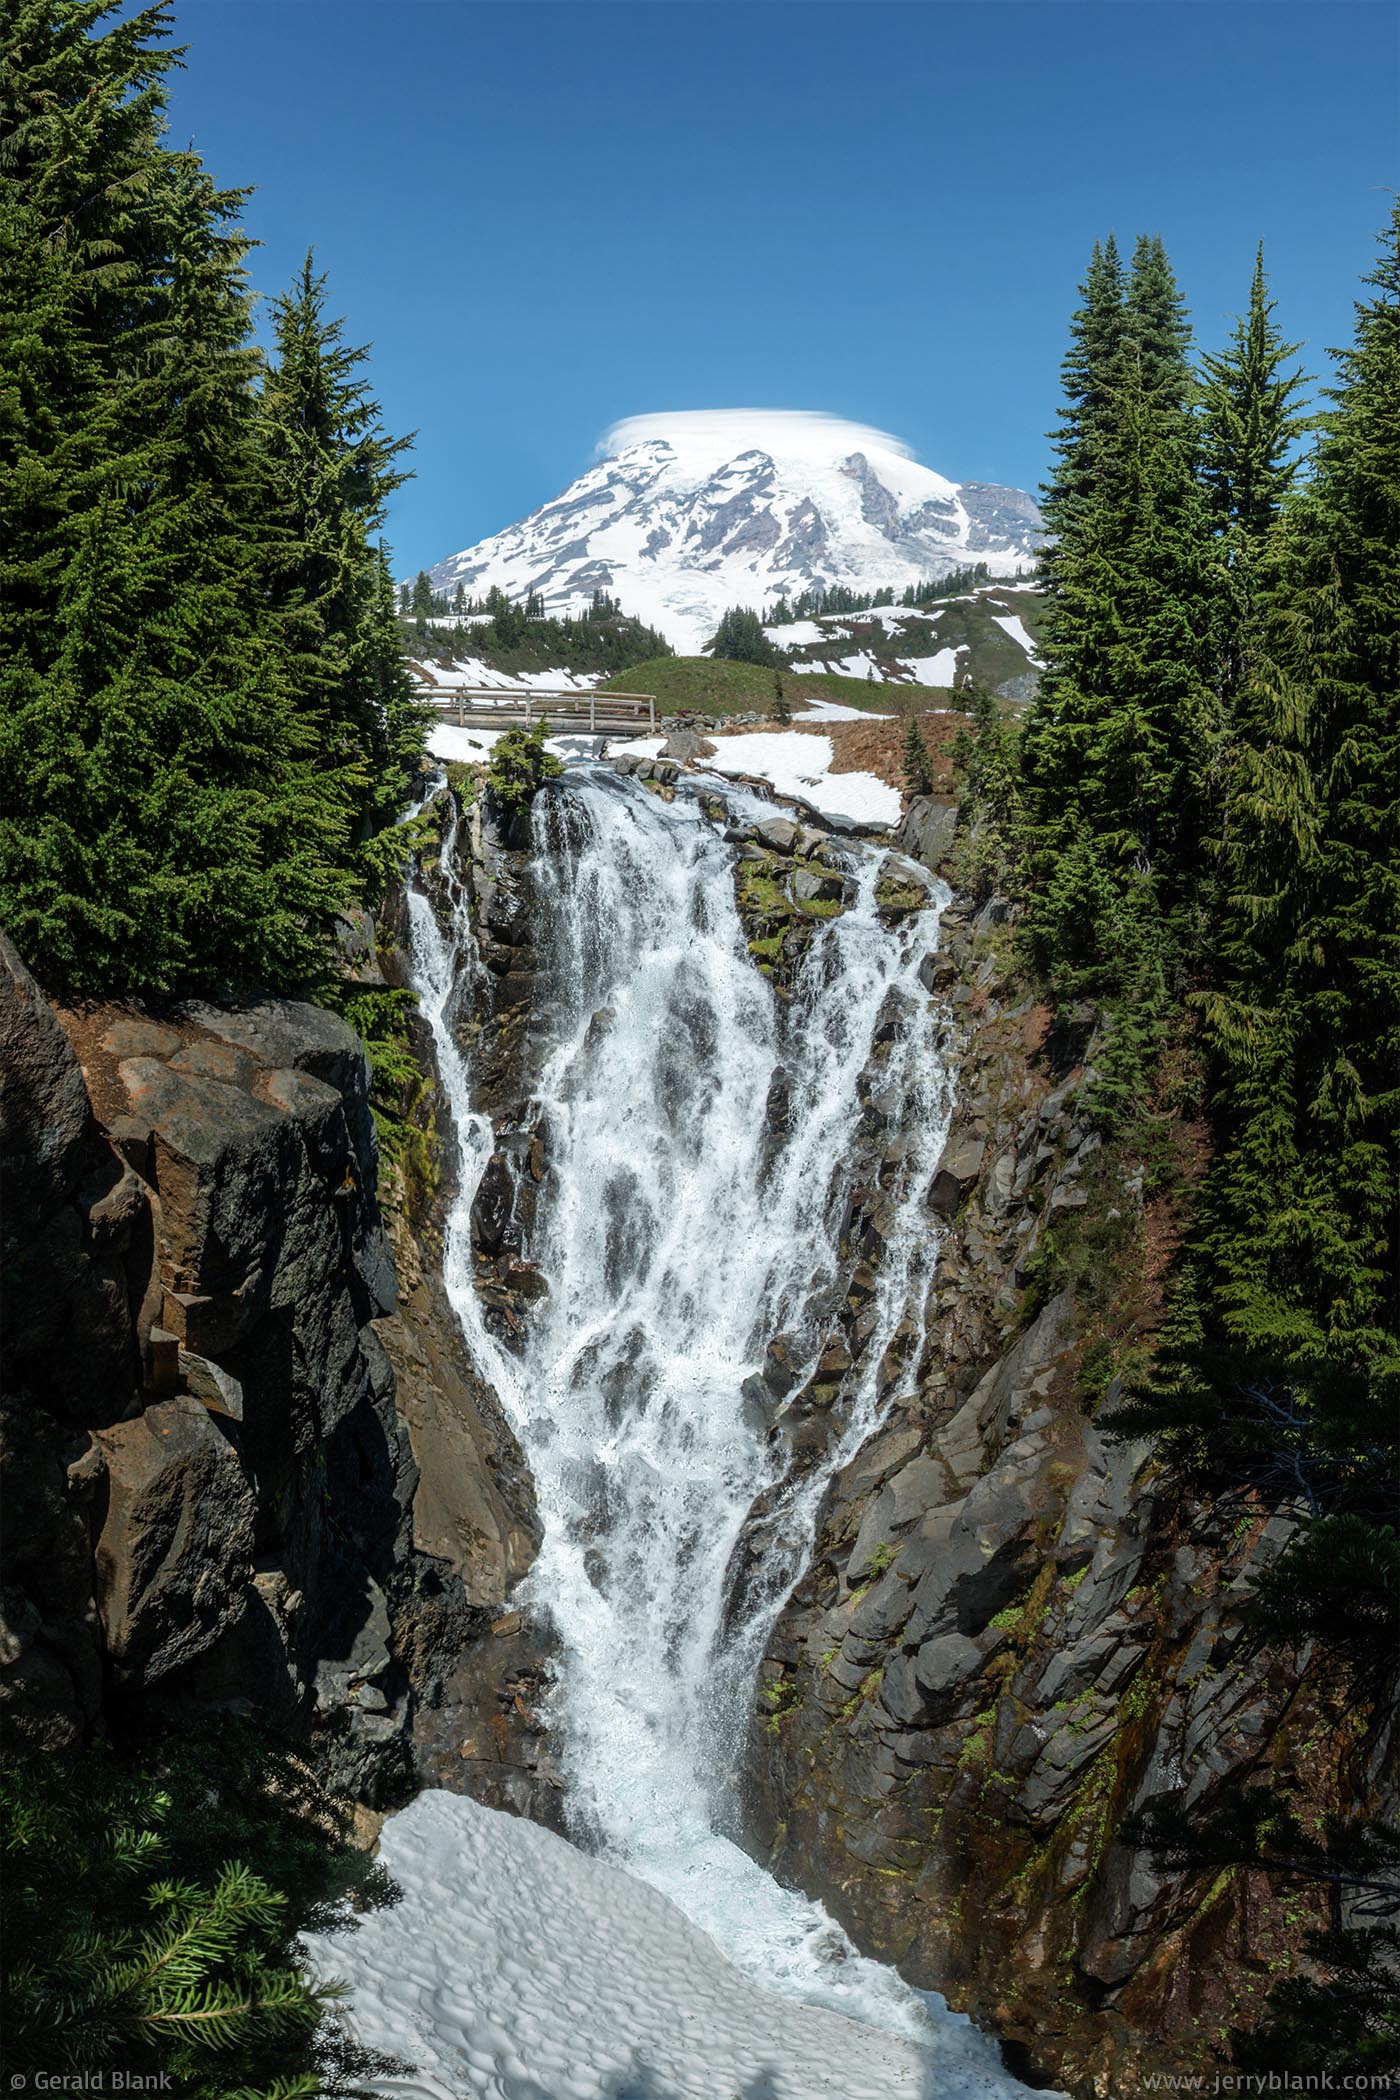 #31763 - The peak of Mount Rainier can be seen between the trees surrounding Myrtle Falls on Edith Creek, in Mount Rainier National Park, Washington - photo by Jerry Blank